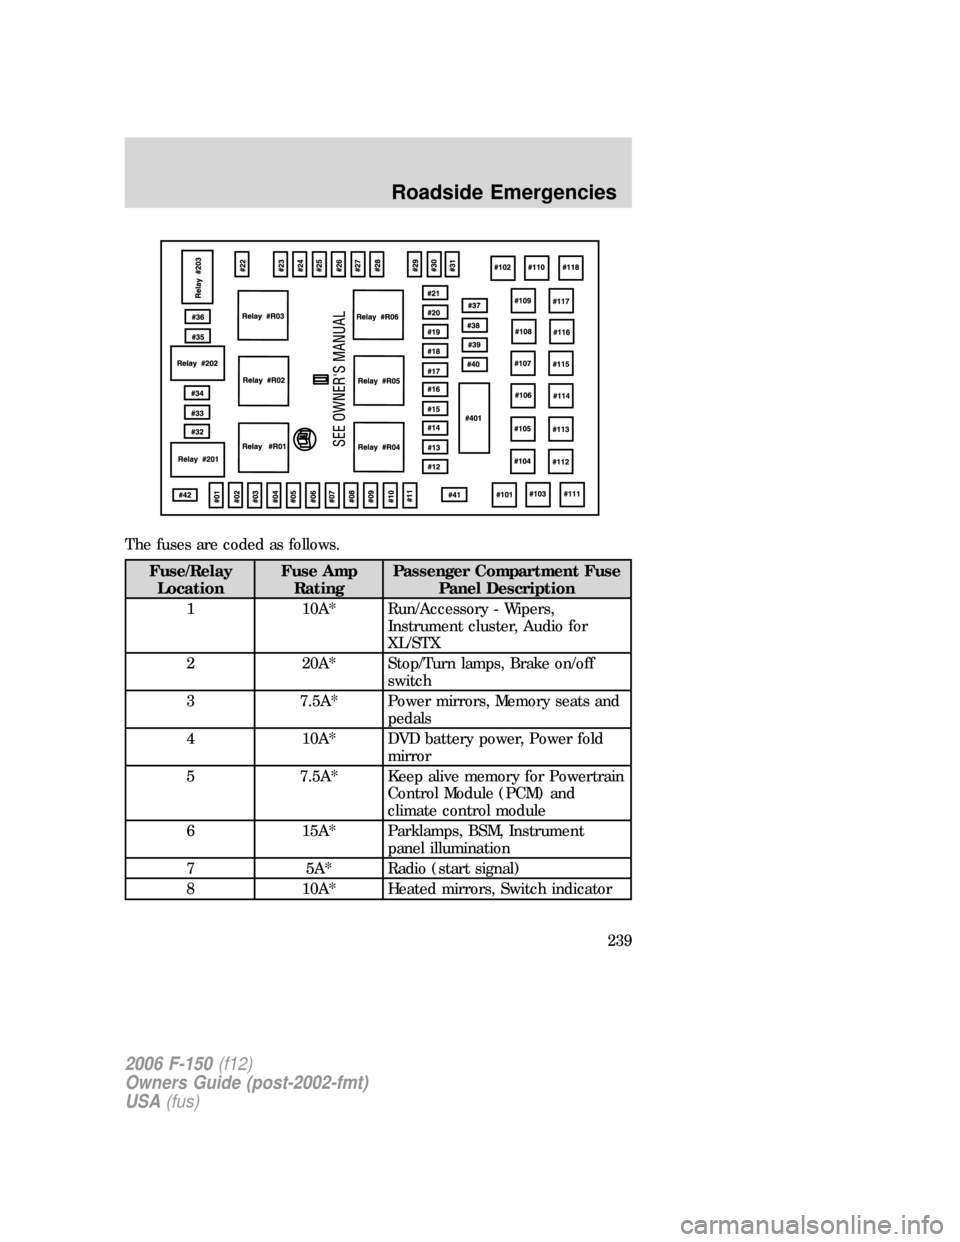 FORD F150 2006 11.G Owners Manual The fuses are coded as follows.
Fuse/Relay
LocationFuse Amp
RatingPassenger Compartment Fuse
Panel Description
1 10A* Run/Accessory - Wipers,
Instrument cluster, Audio for
XL/STX
2 20A* Stop/Turn lamp